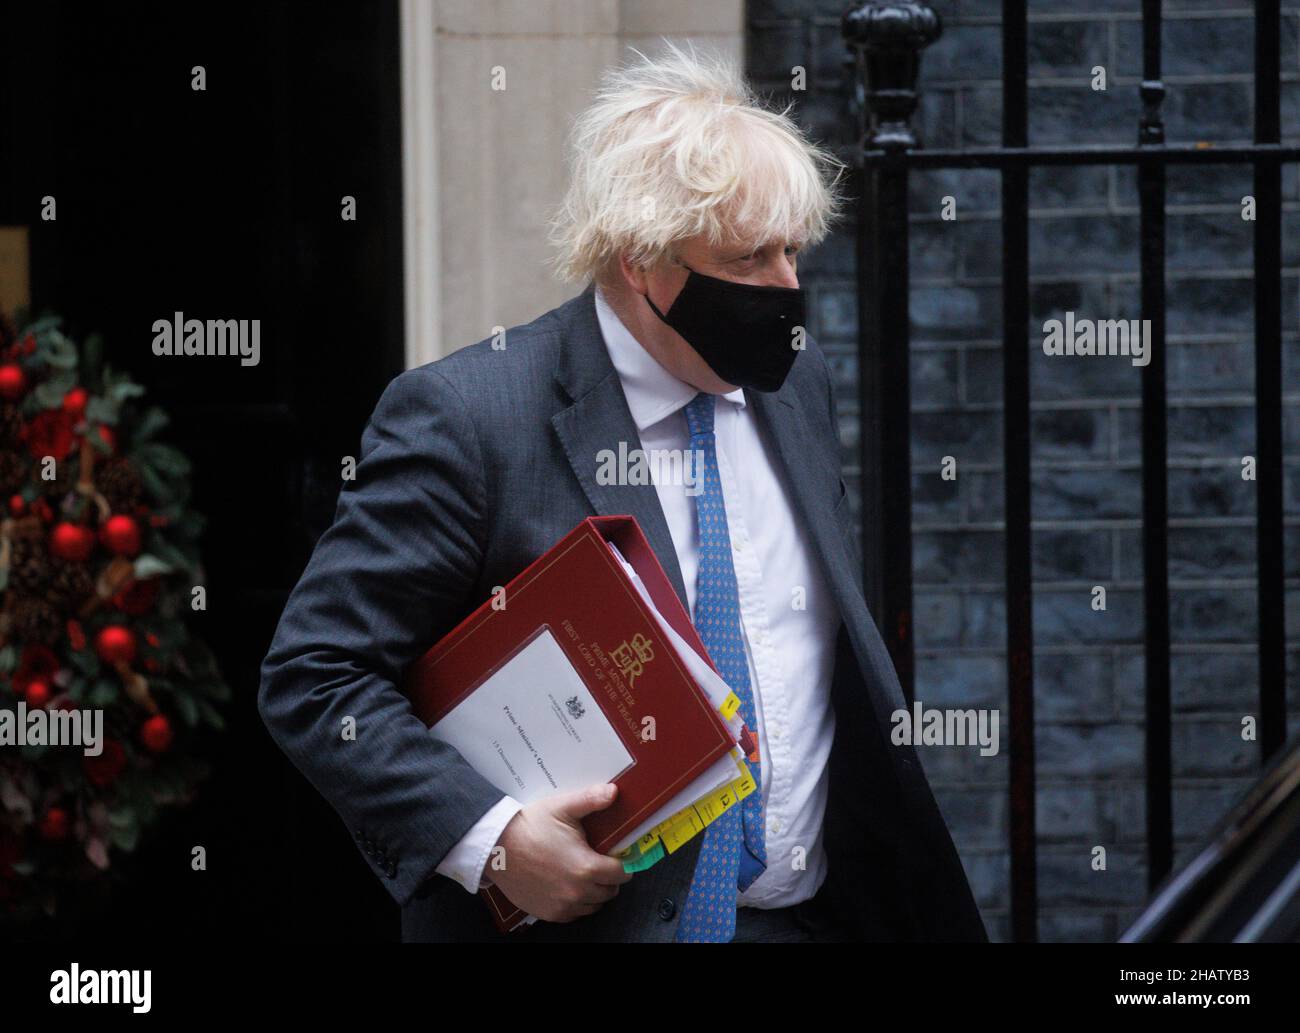 London, UK. 15th Dec, 2021. Prime Minister, Boris Johnson, leaves 10 Downing Street to go to Parliament for Prime Minister's Questions. He will face Keir Starmer over the despatch box where he will face continued questions about the alleged Christmas party at Downing Street. Credit: Tommy London/Alamy Live News Stock Photo